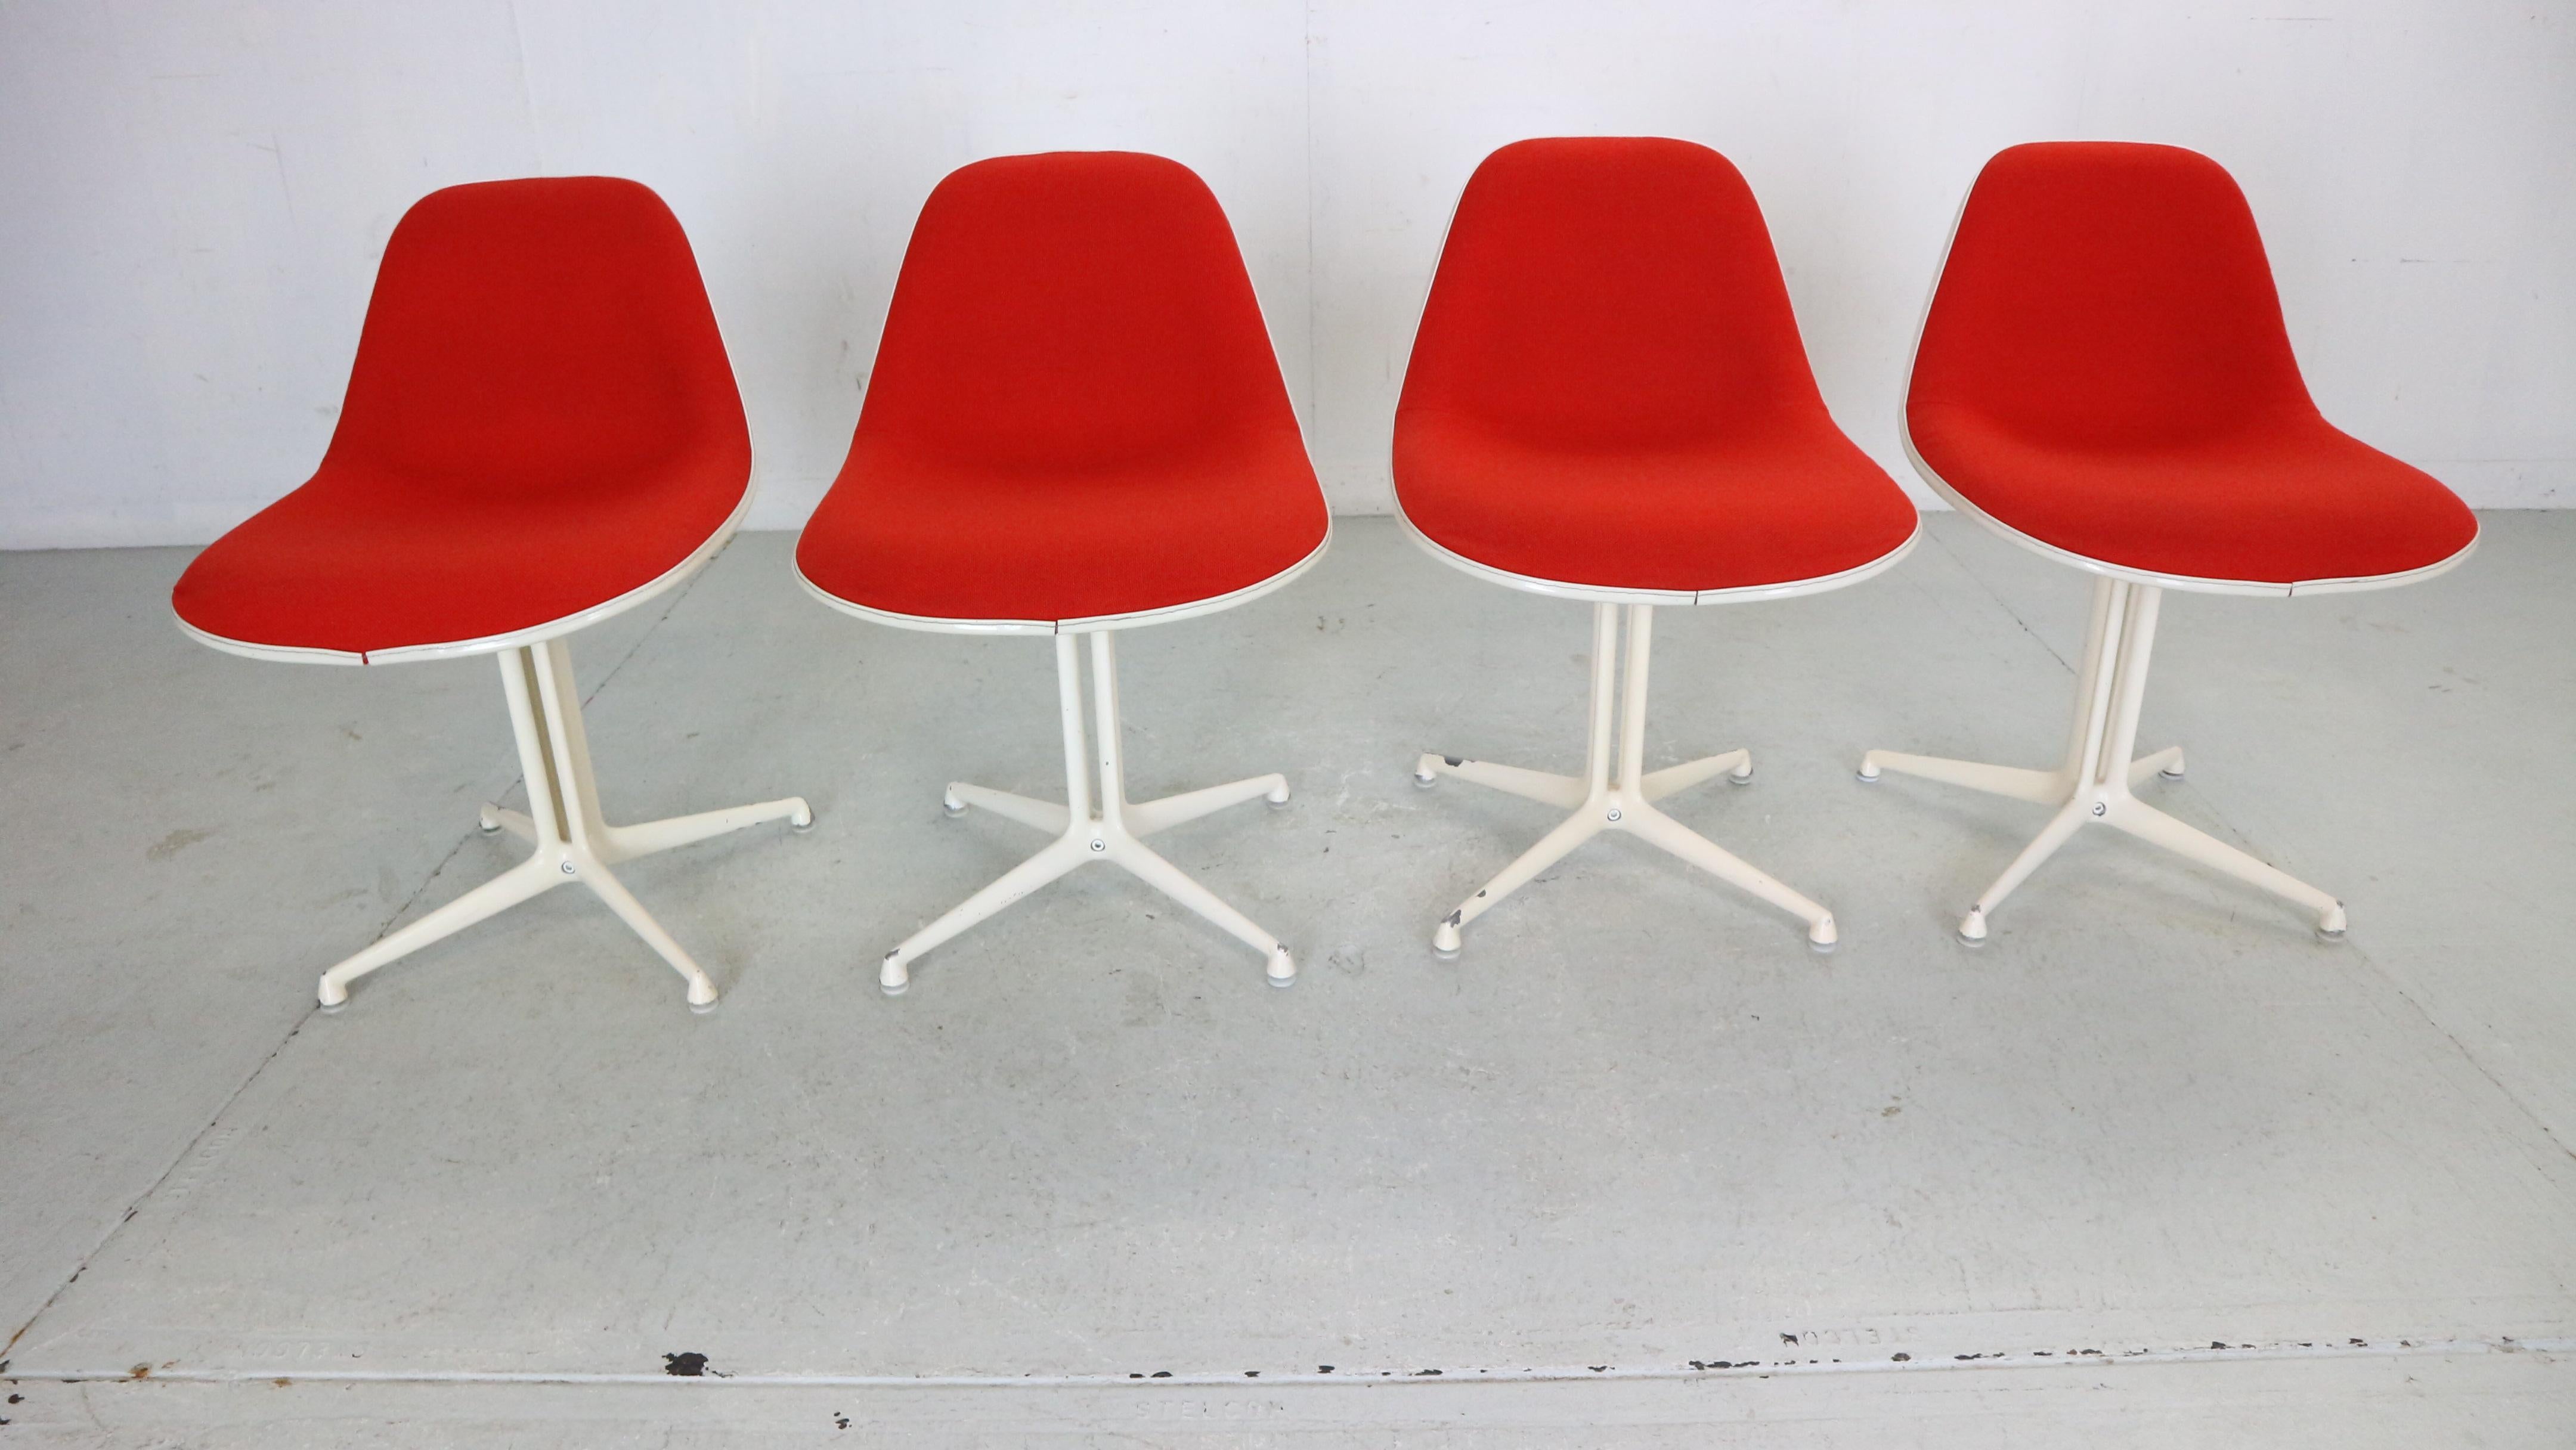 Mid- Century modern set of 4 dinning chairs designed by Ray and Charles Eames for Herman Miller, 1960's circa.

The 